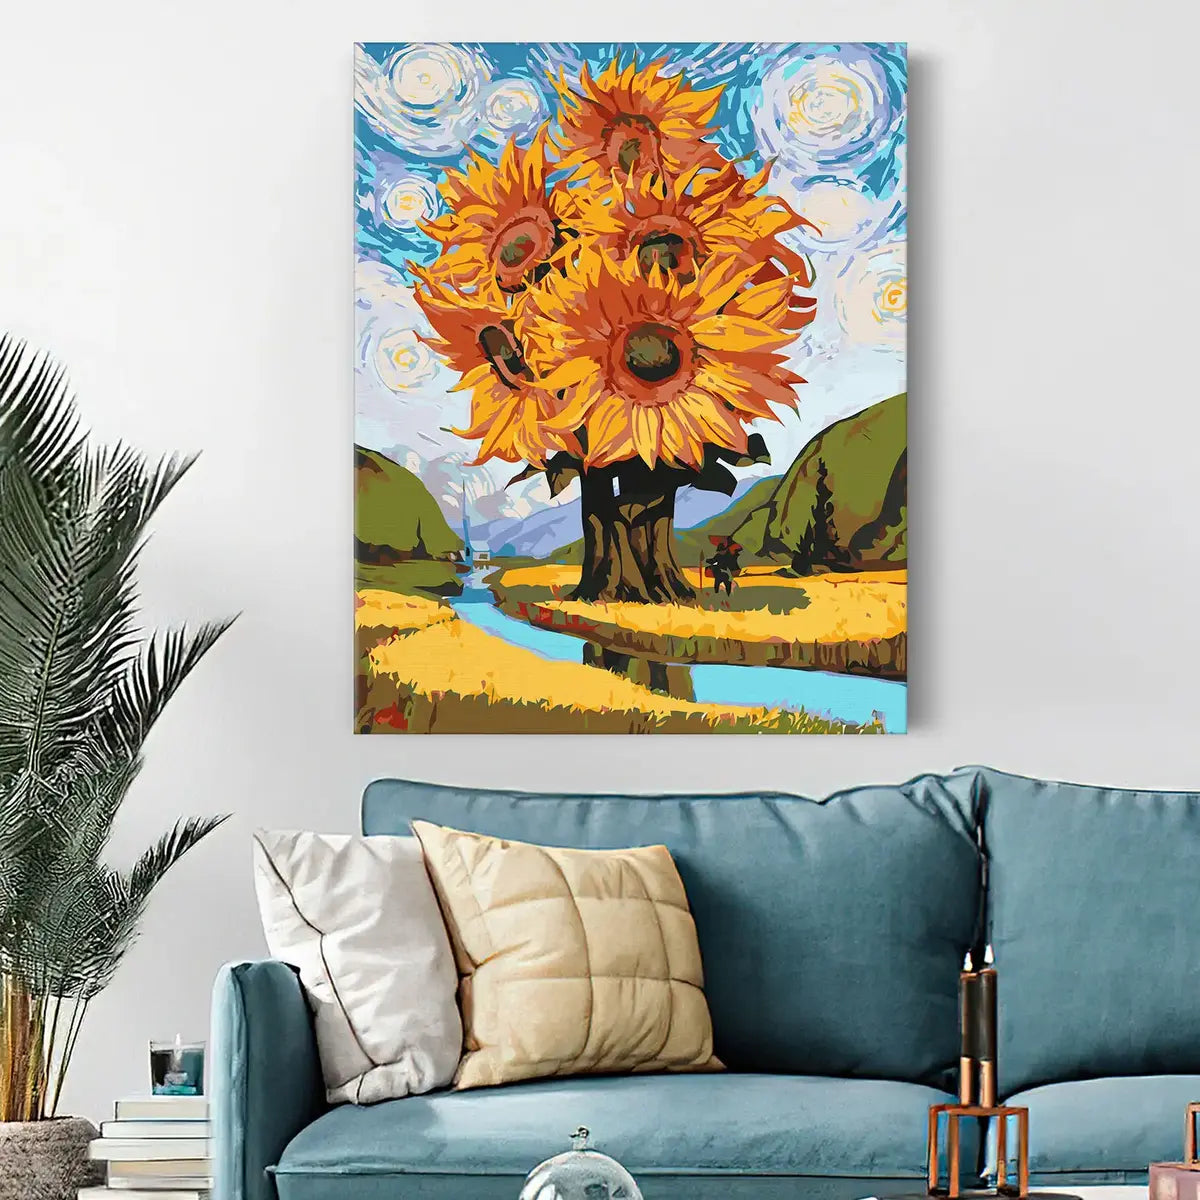 Sunflowers in a field in the style of Van Gogh